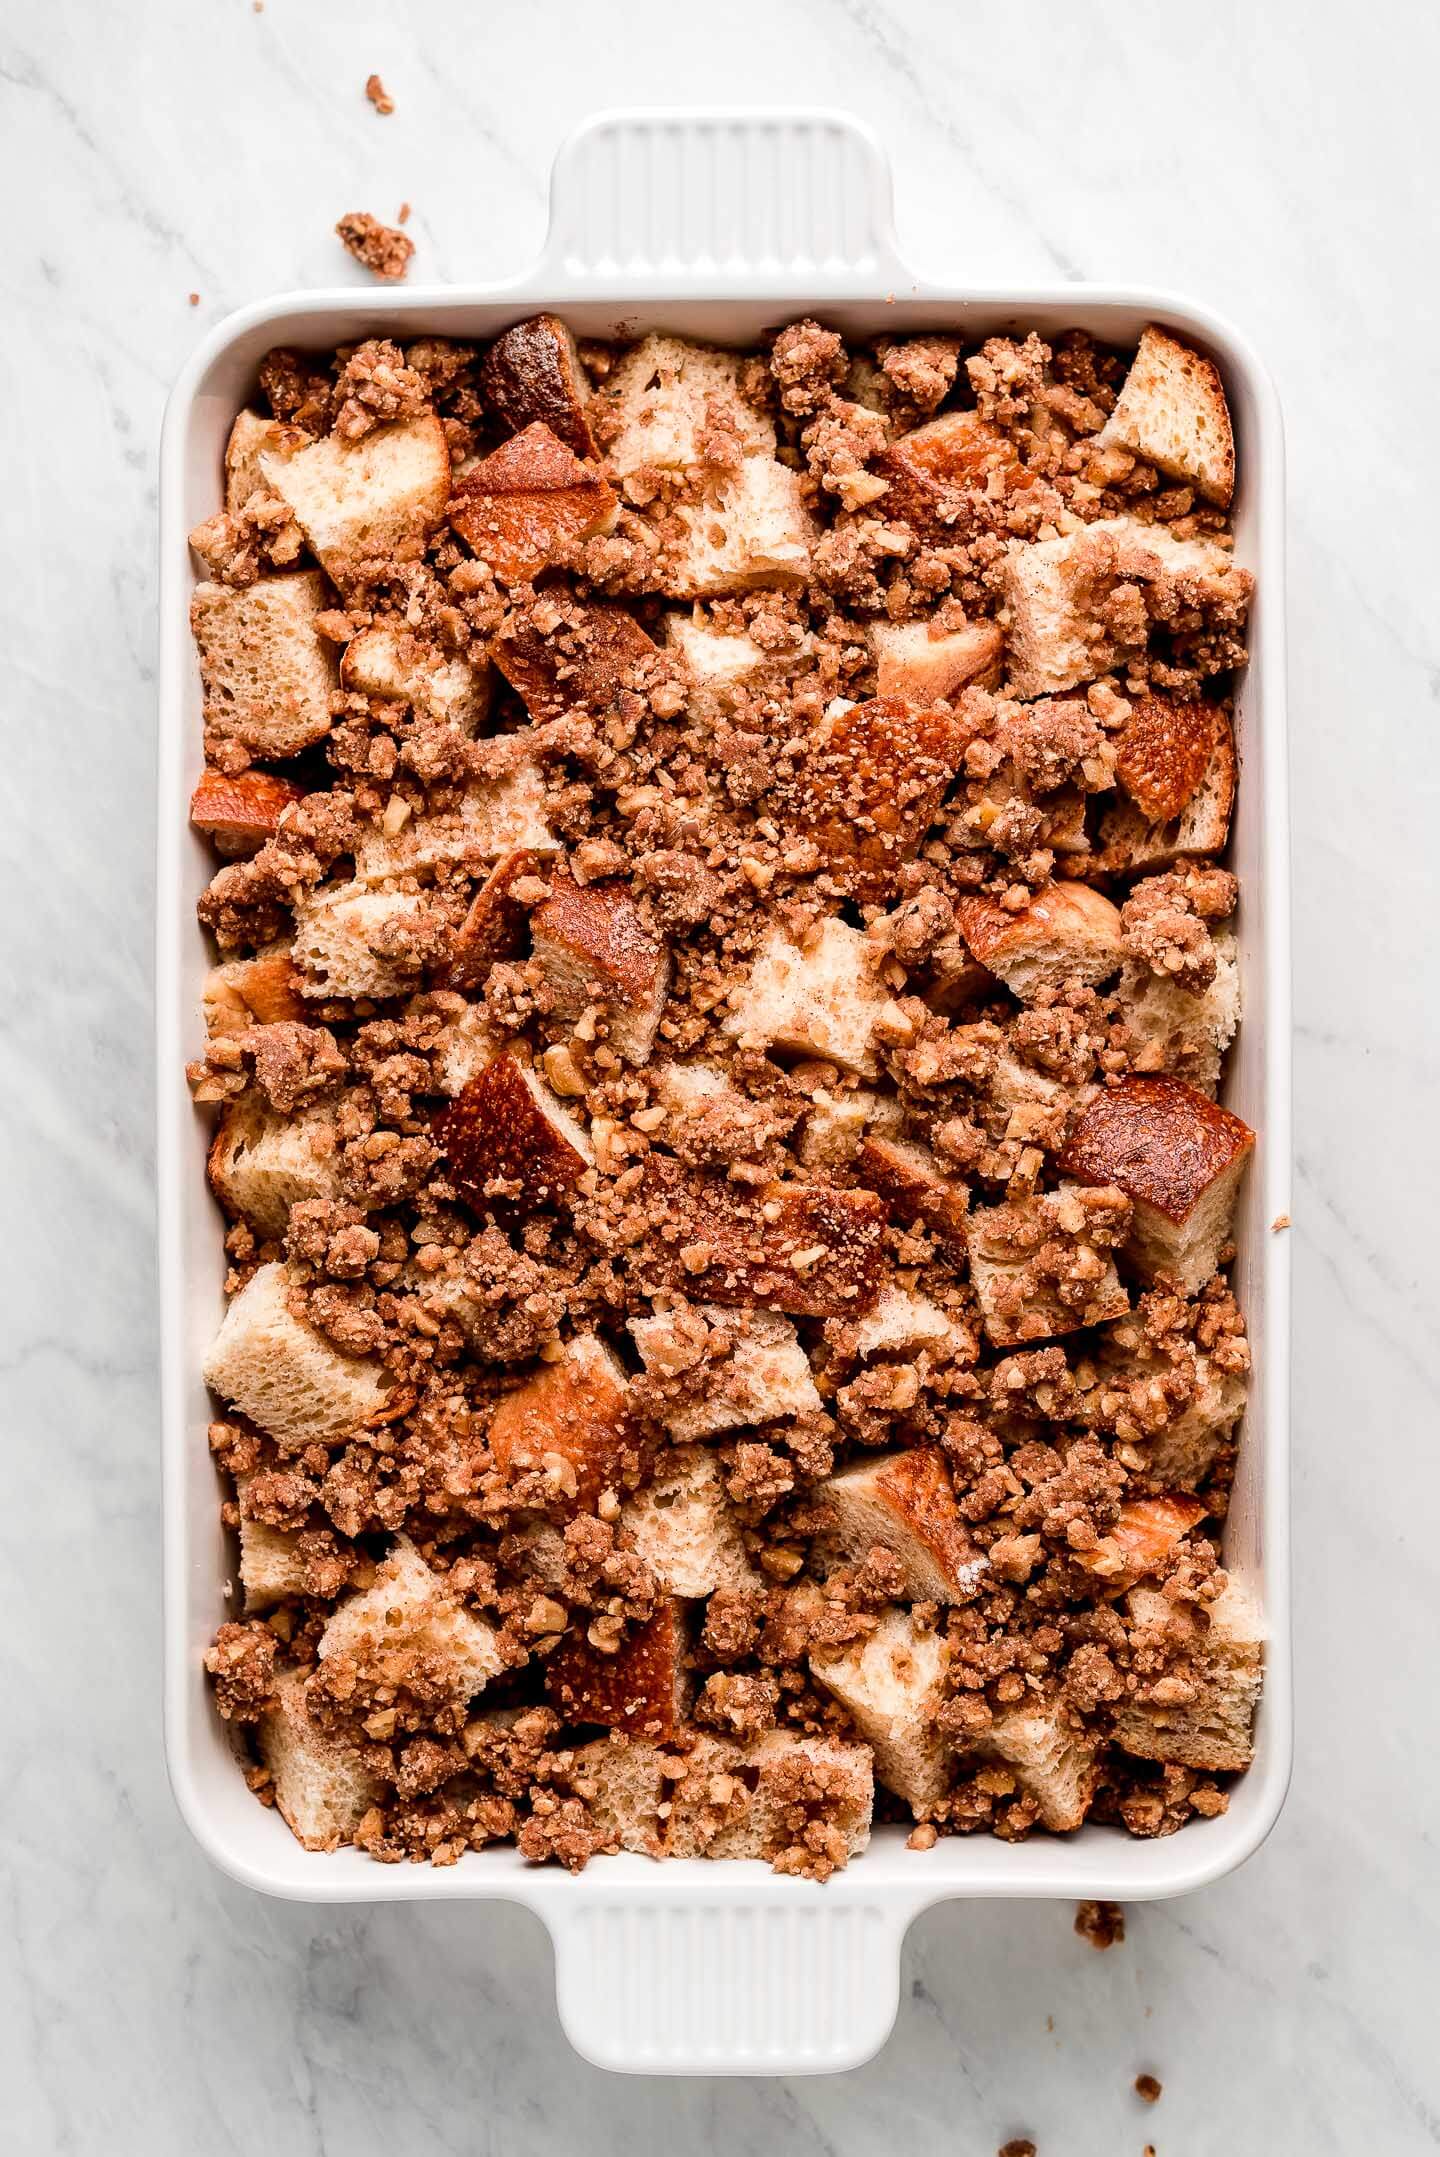 Cubes of bread in a baking pan with streusel on top.